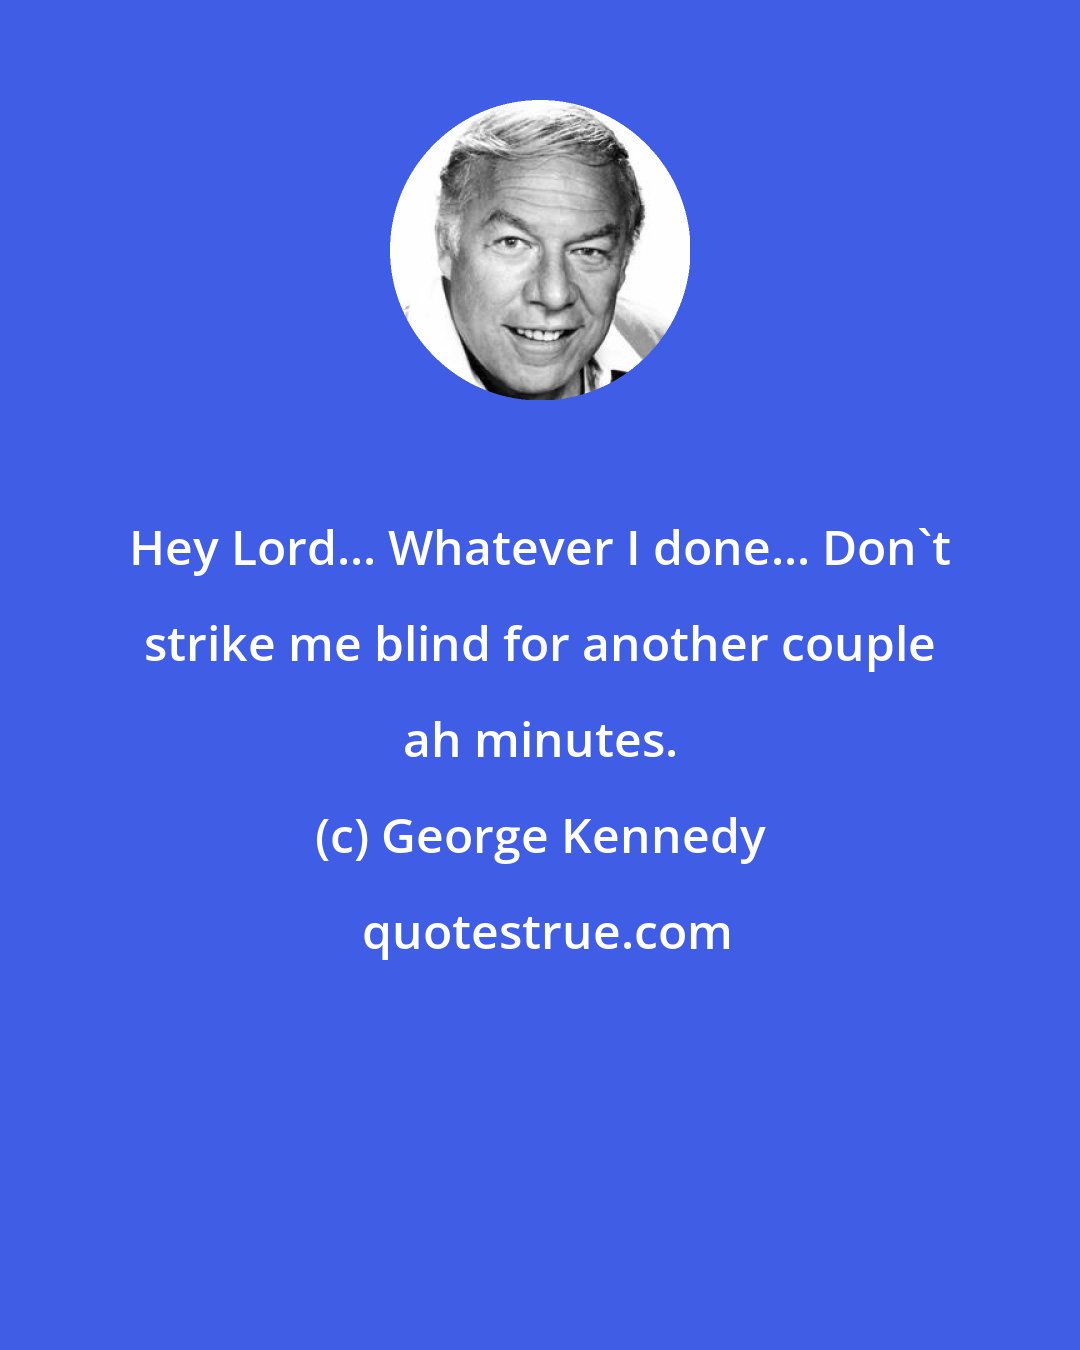 George Kennedy: Hey Lord... Whatever I done... Don't strike me blind for another couple ah minutes.